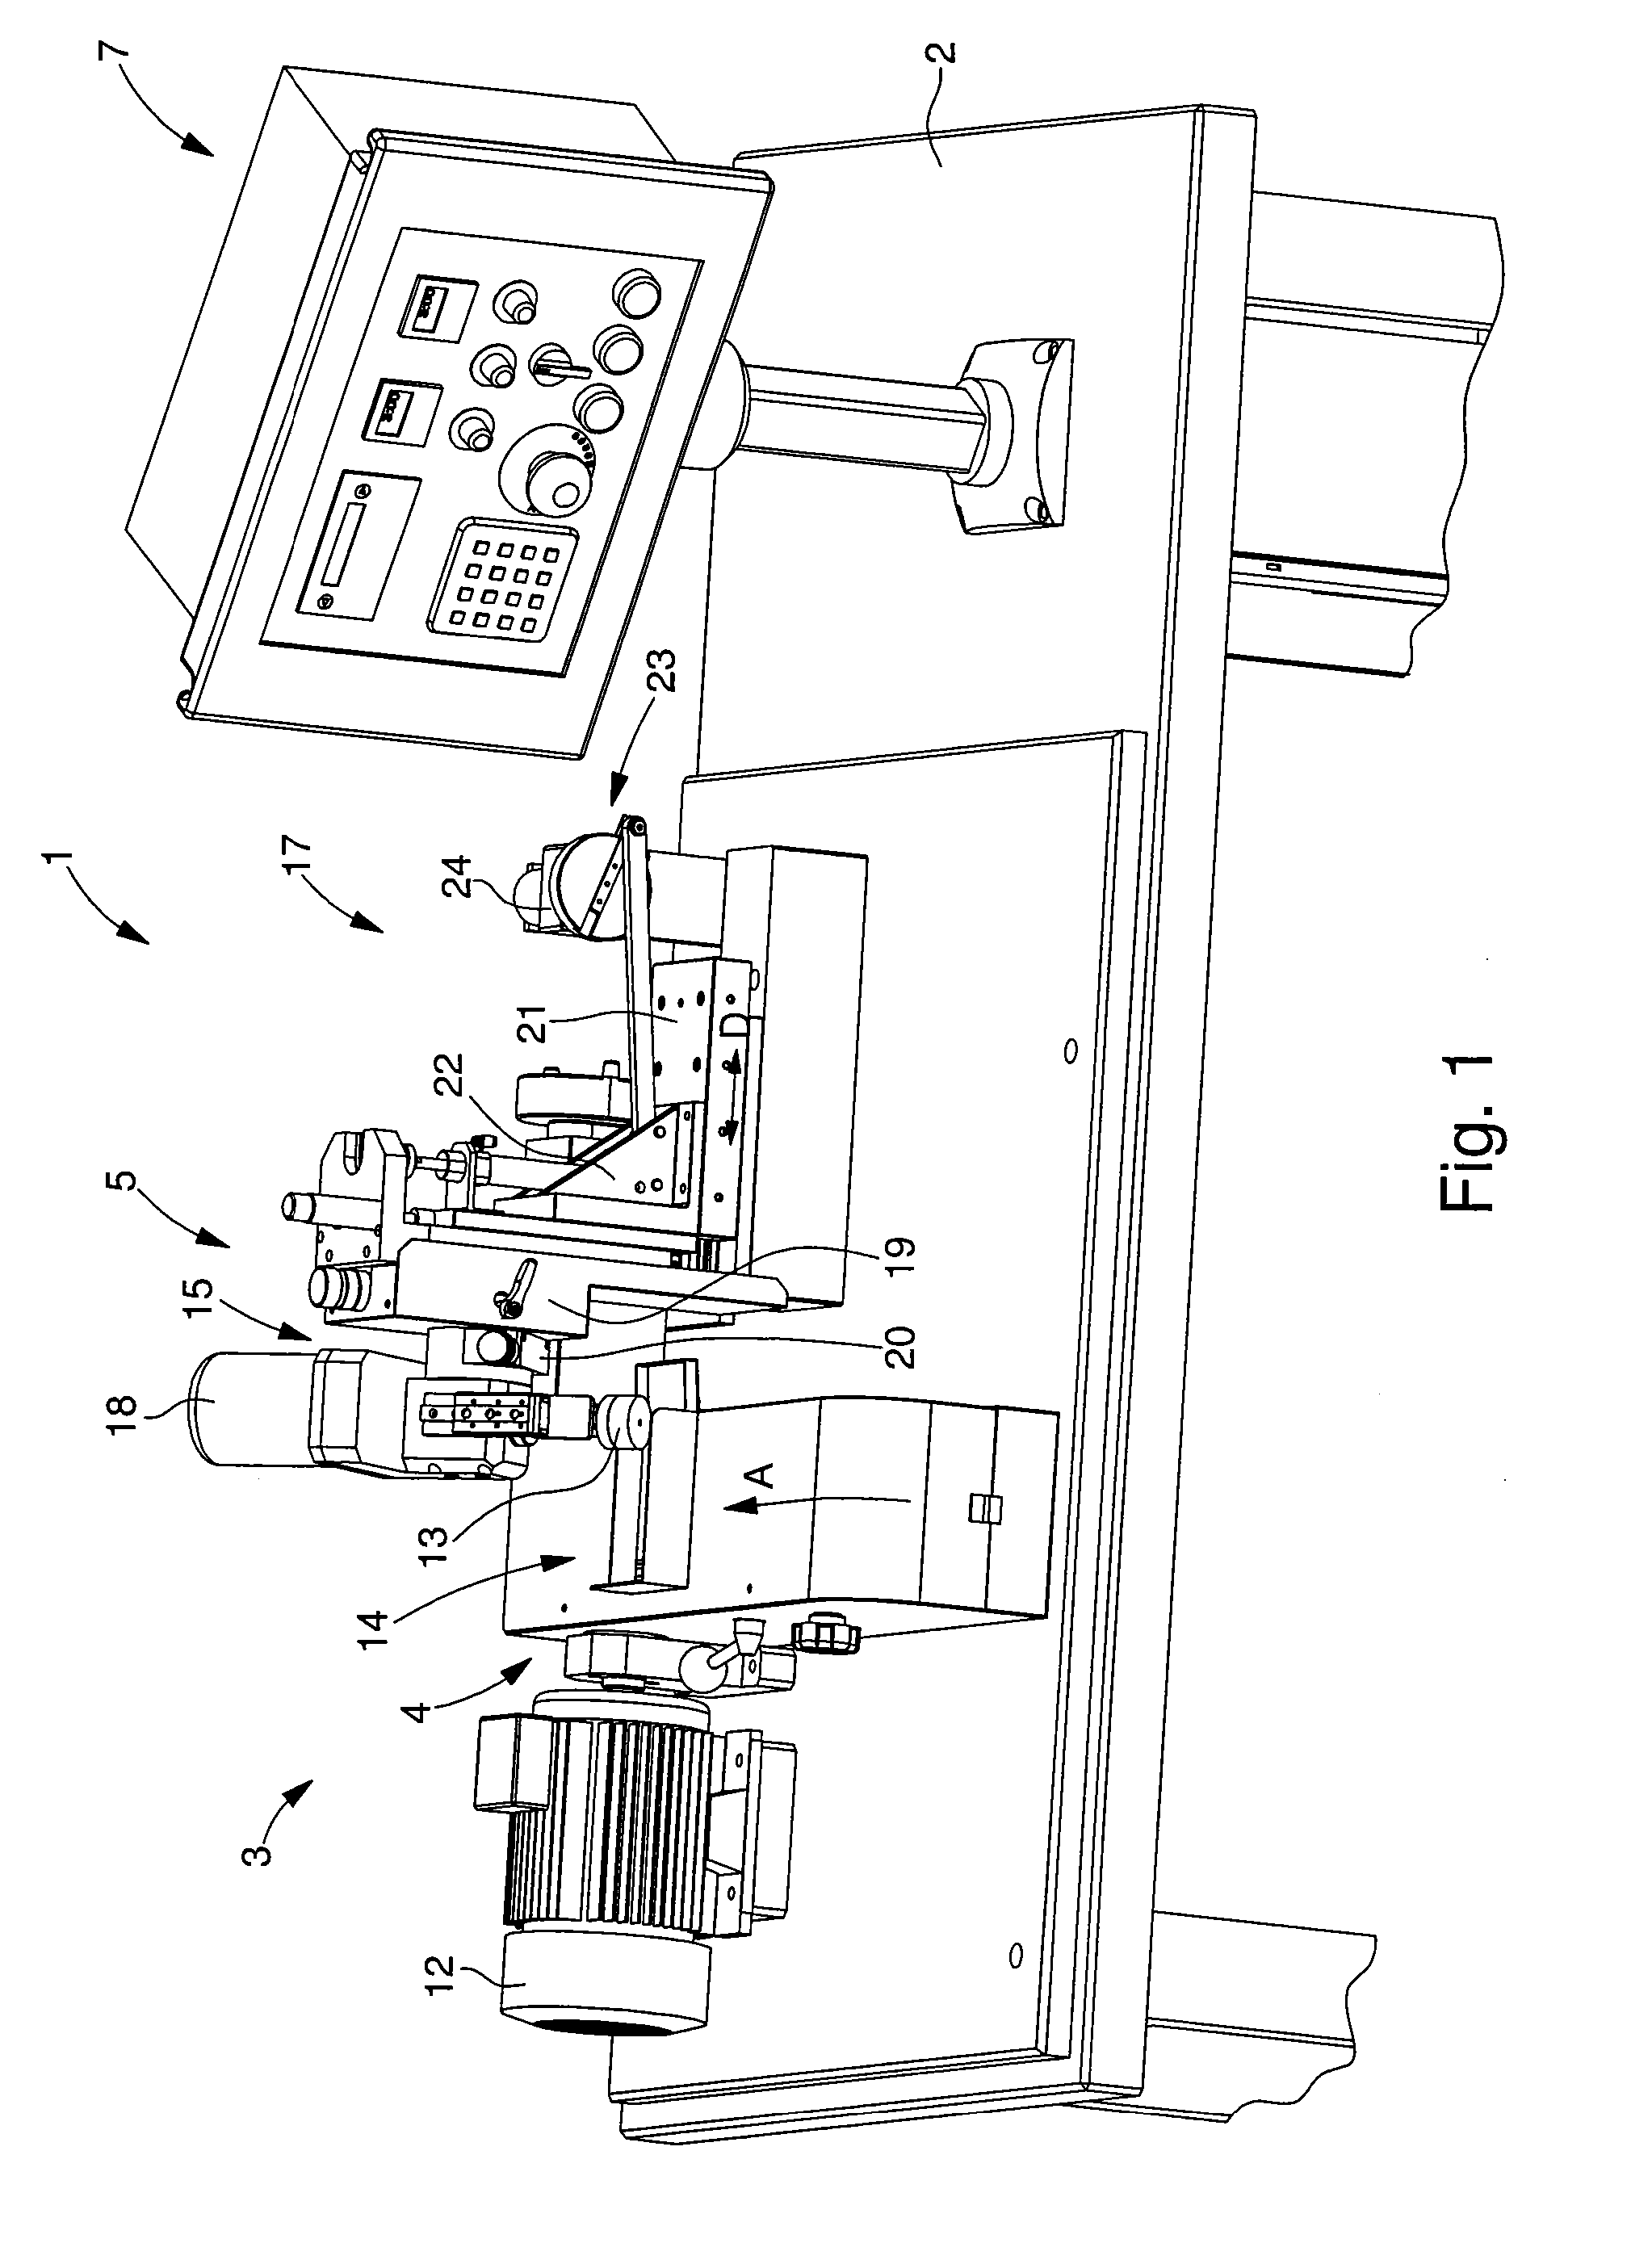 System for machining a bevel